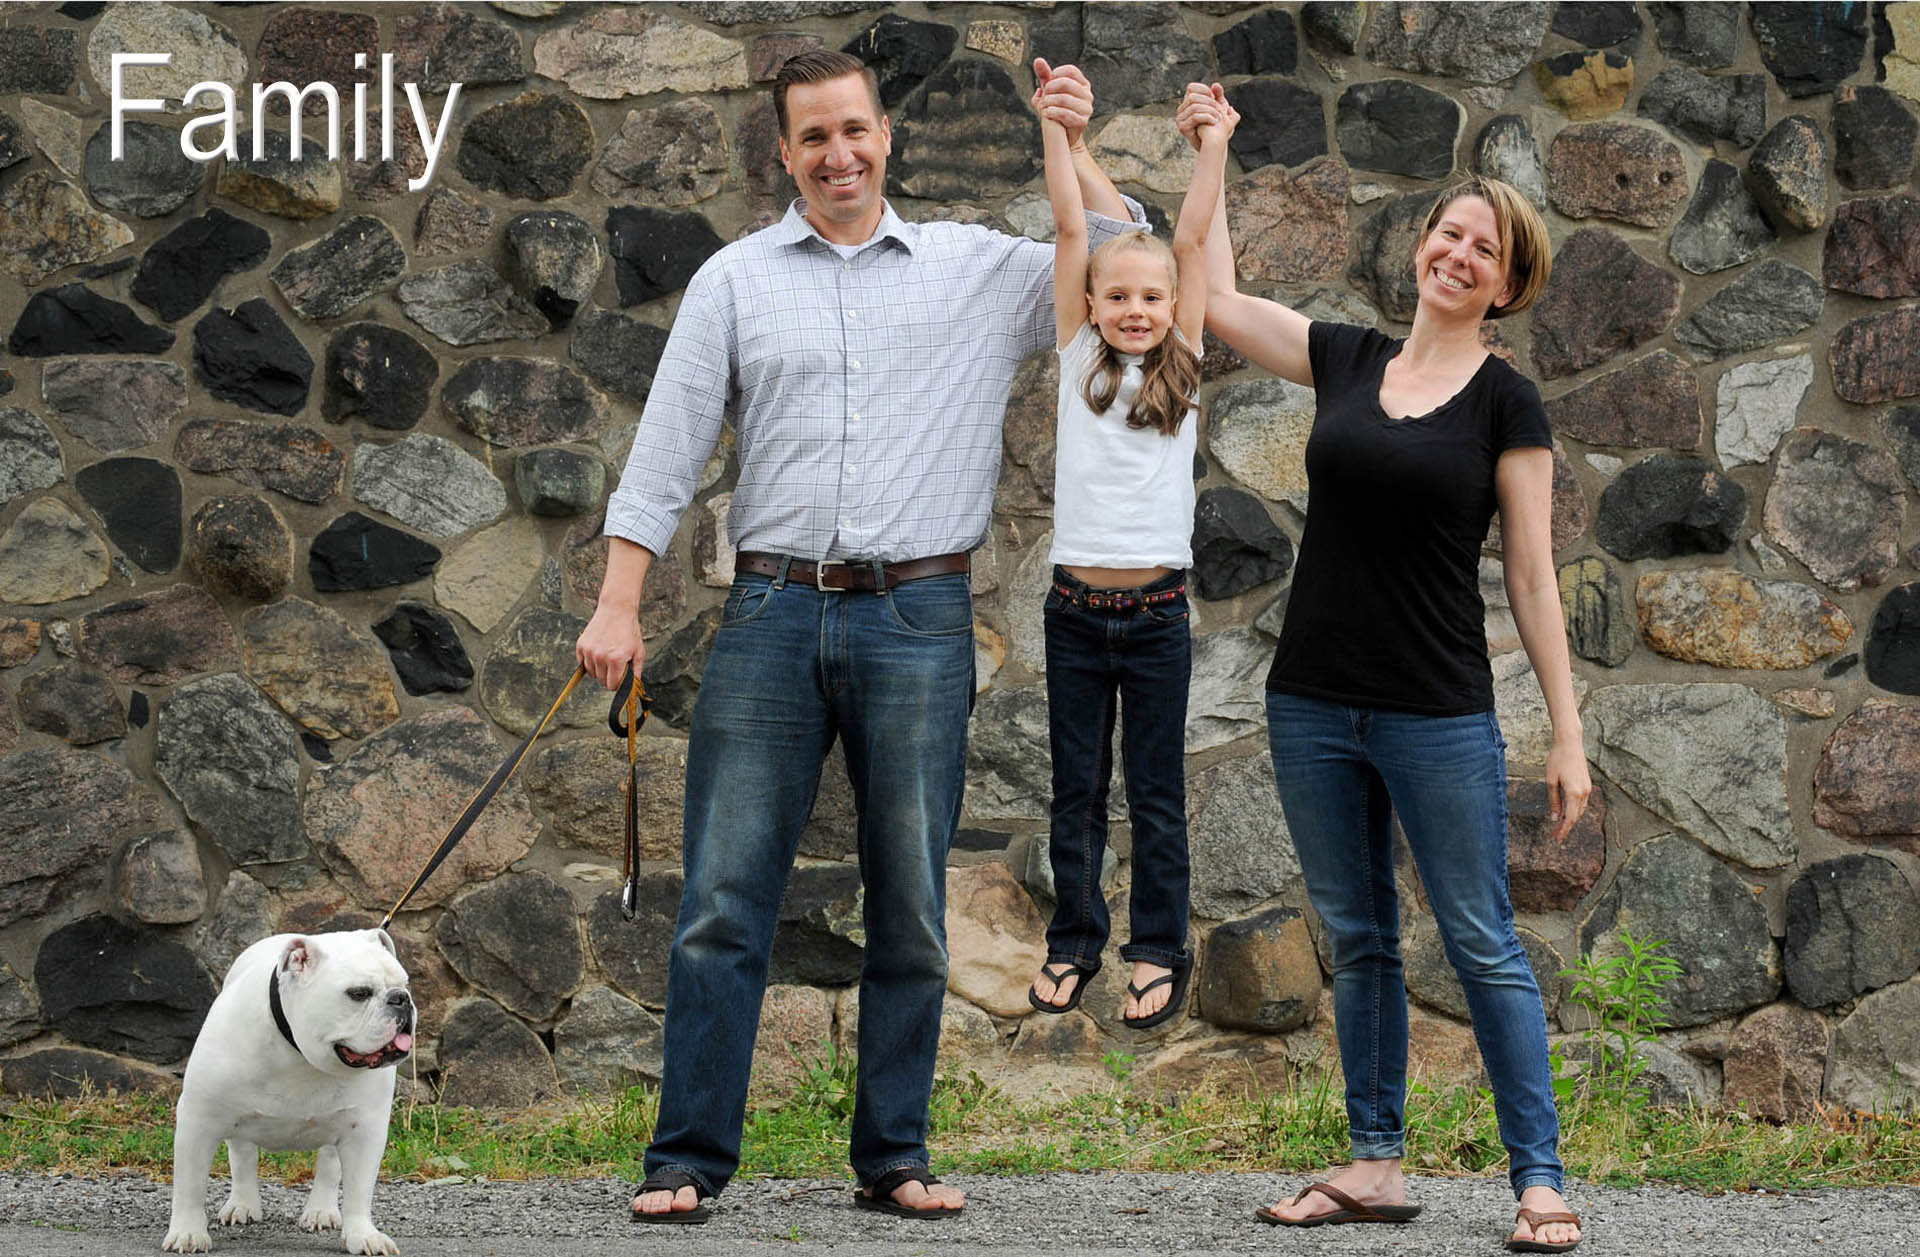 A metro Detroit area couple celebrate the arrival of their adopted daughter with a fun, happy family photo downtown Detroit, Michigan.